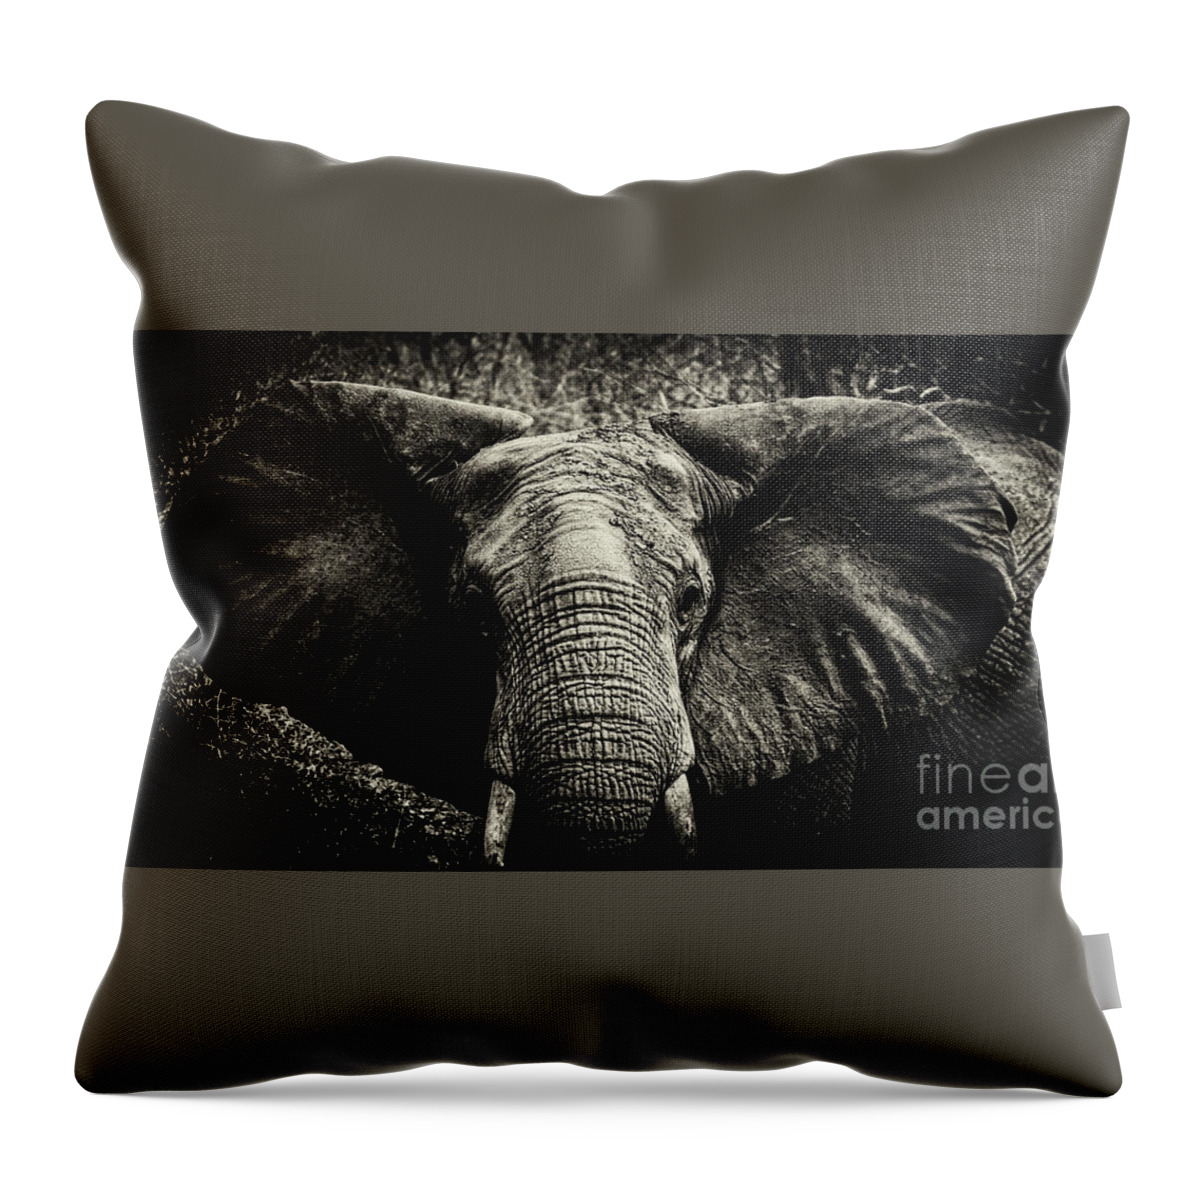 Elephant Throw Pillow featuring the photograph African Elephant #1 by Lev Kaytsner